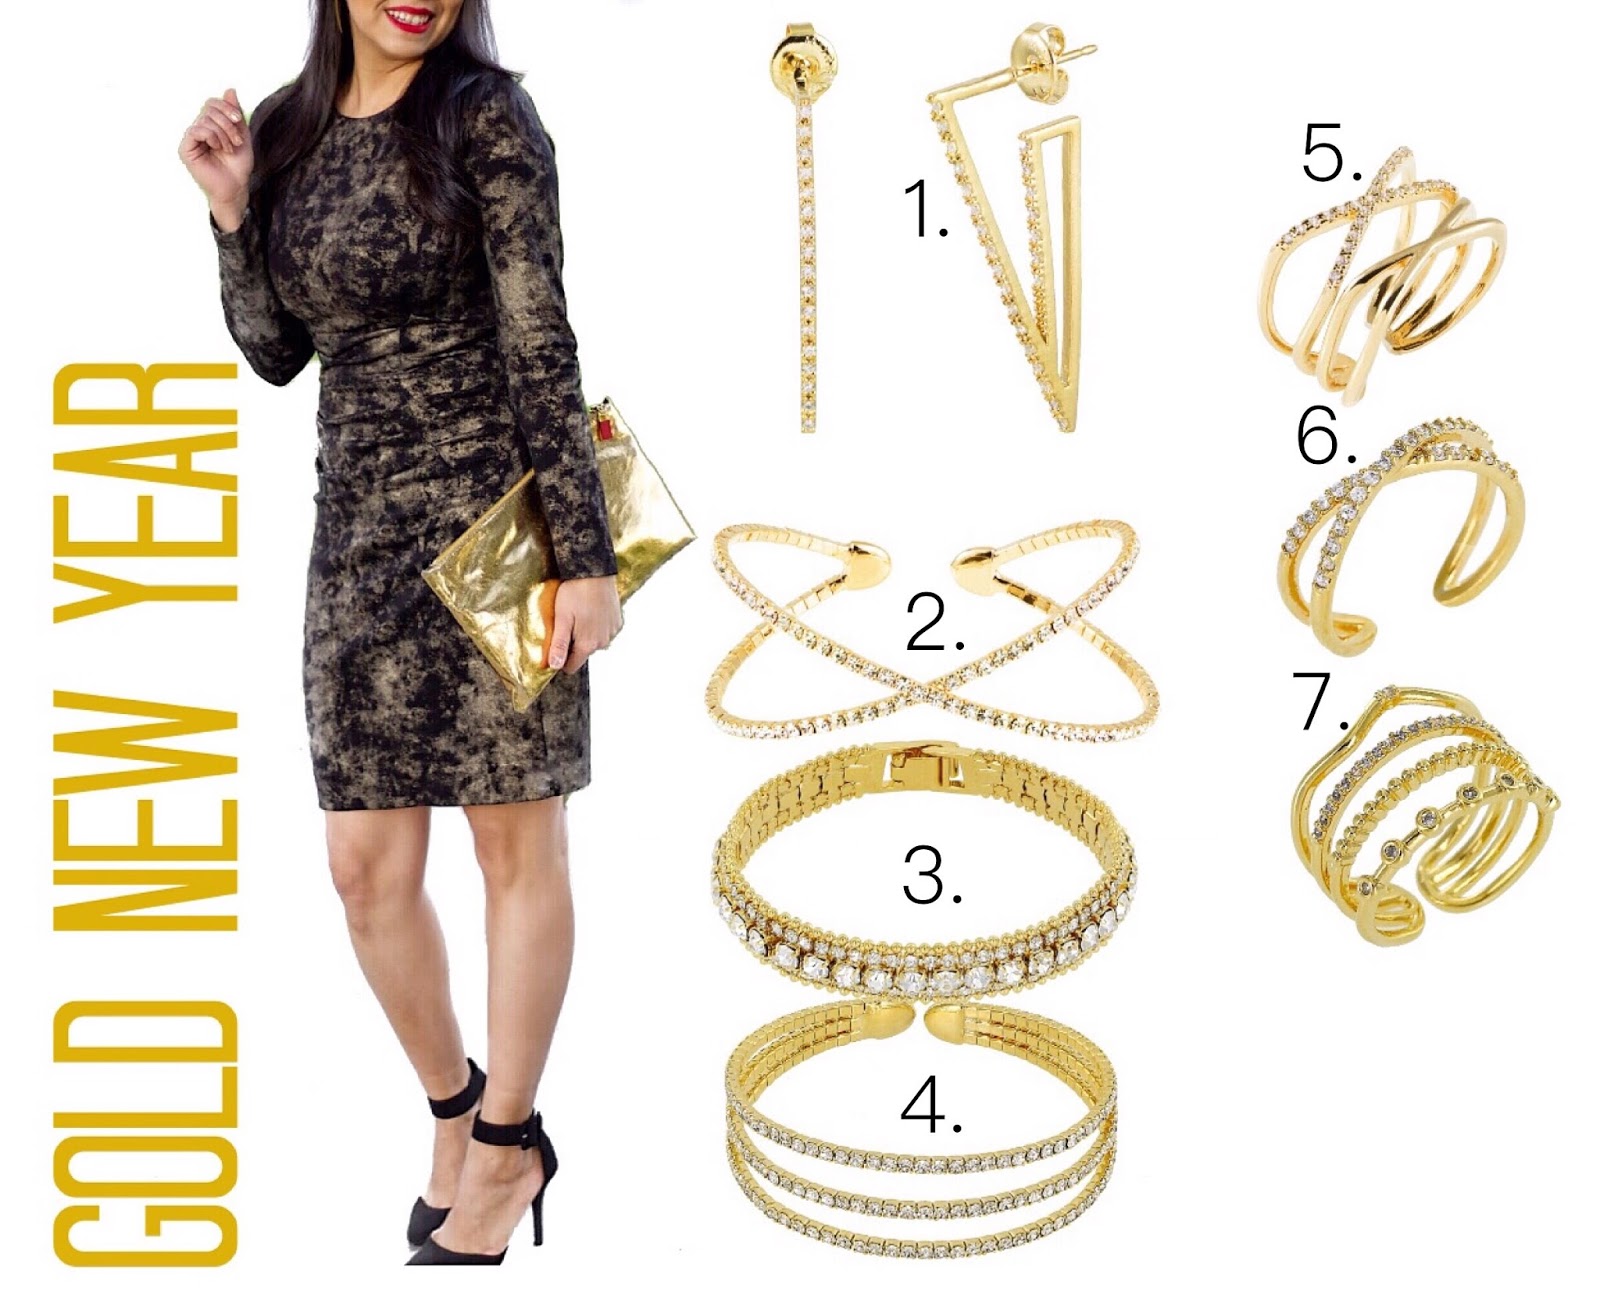 How to Accessorize for New Year's Eve